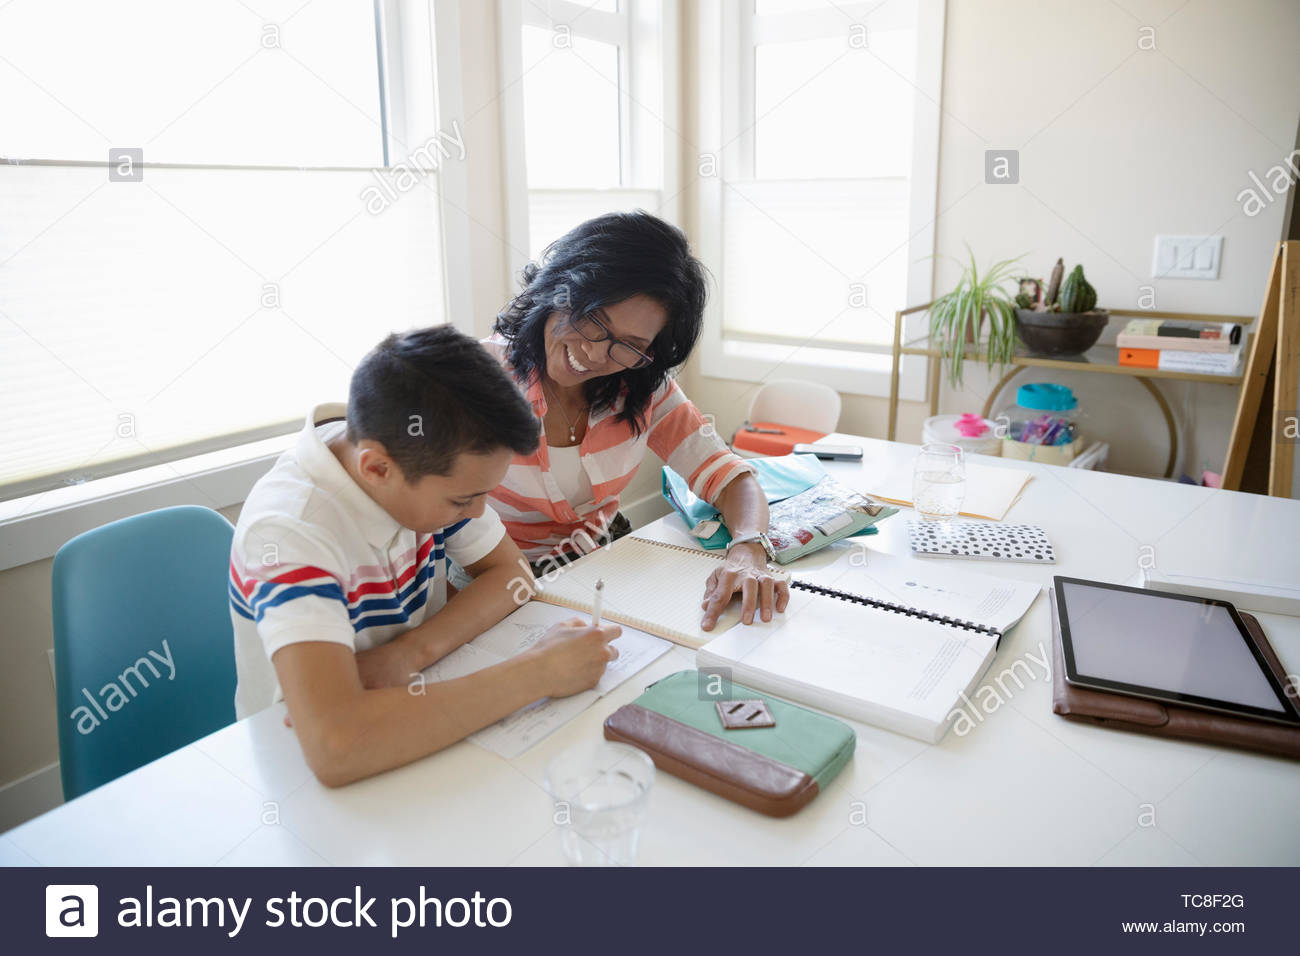 Mother helping son doing homework at table Stock Photo